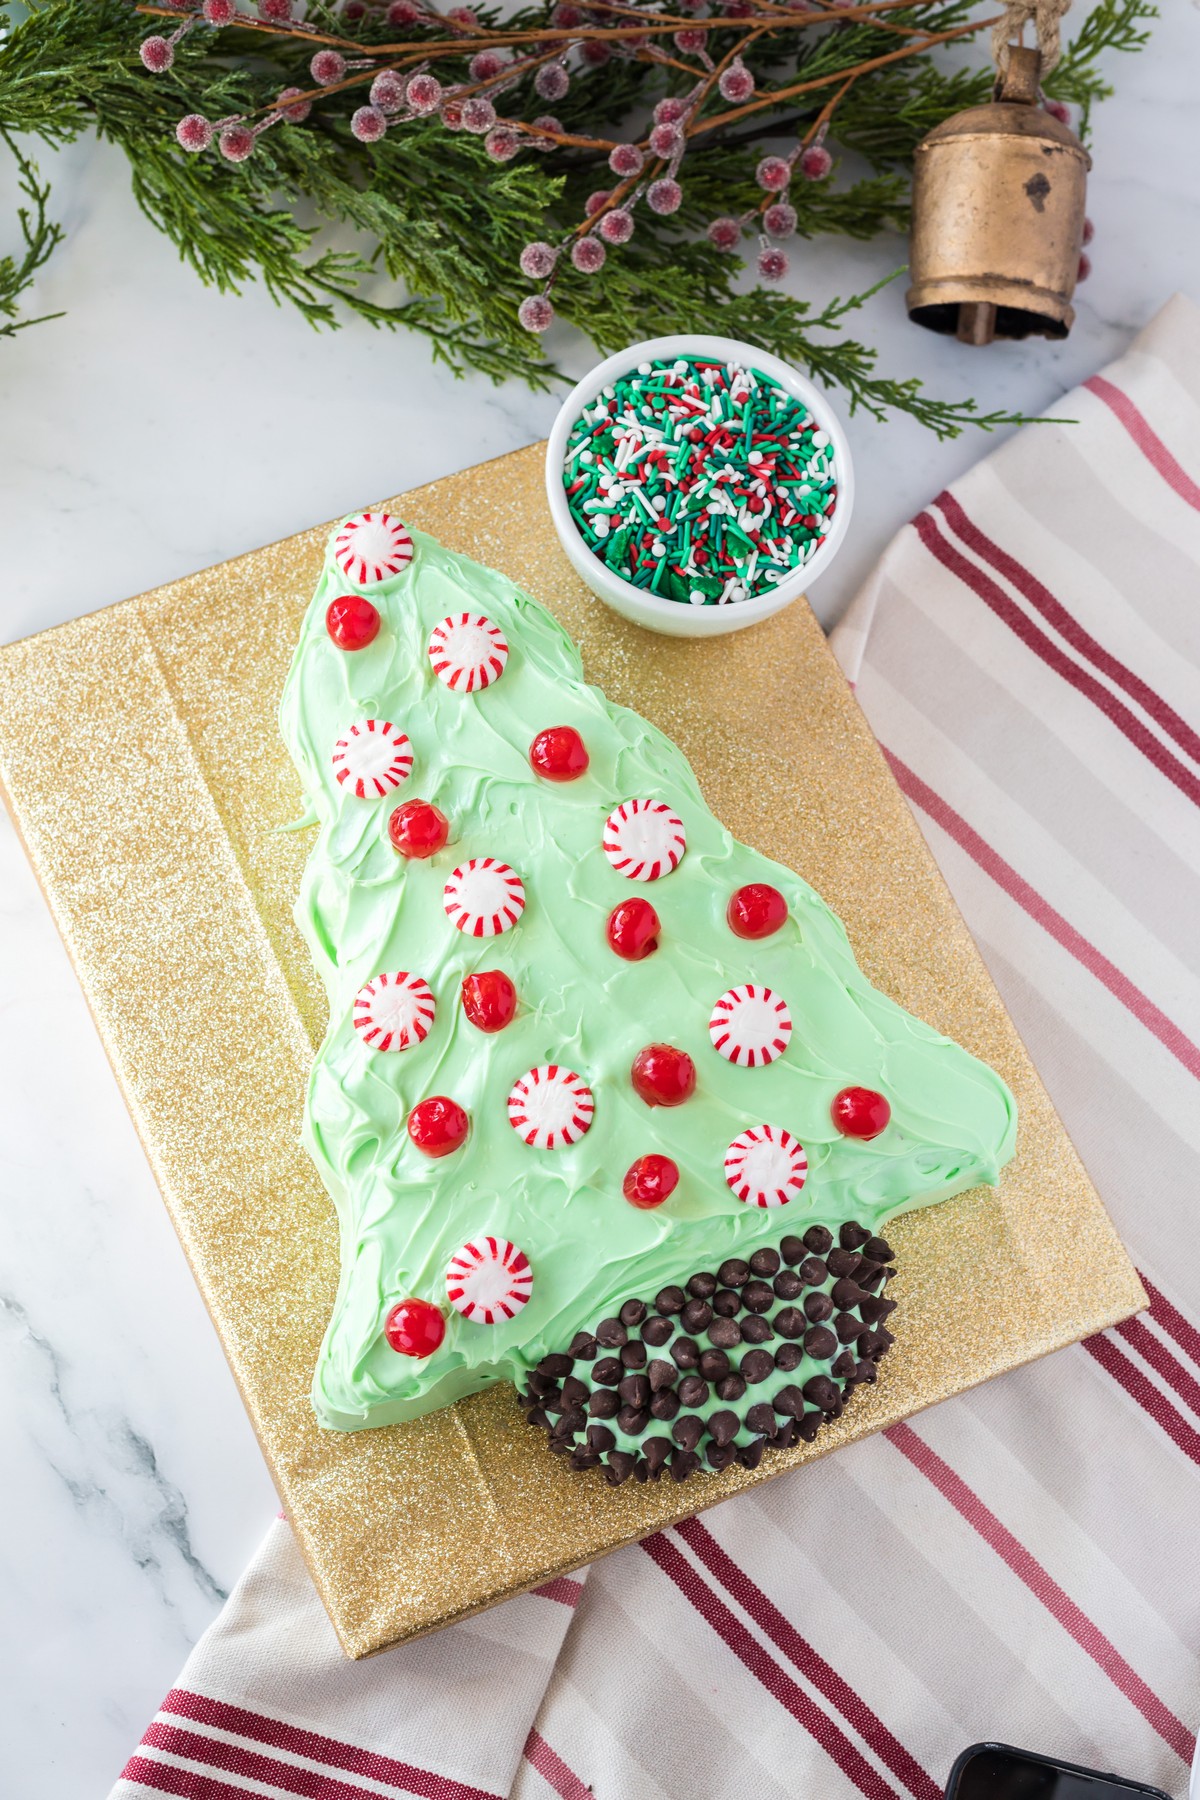 decorating a christmas tree cake with peppermints and maraschino cherries